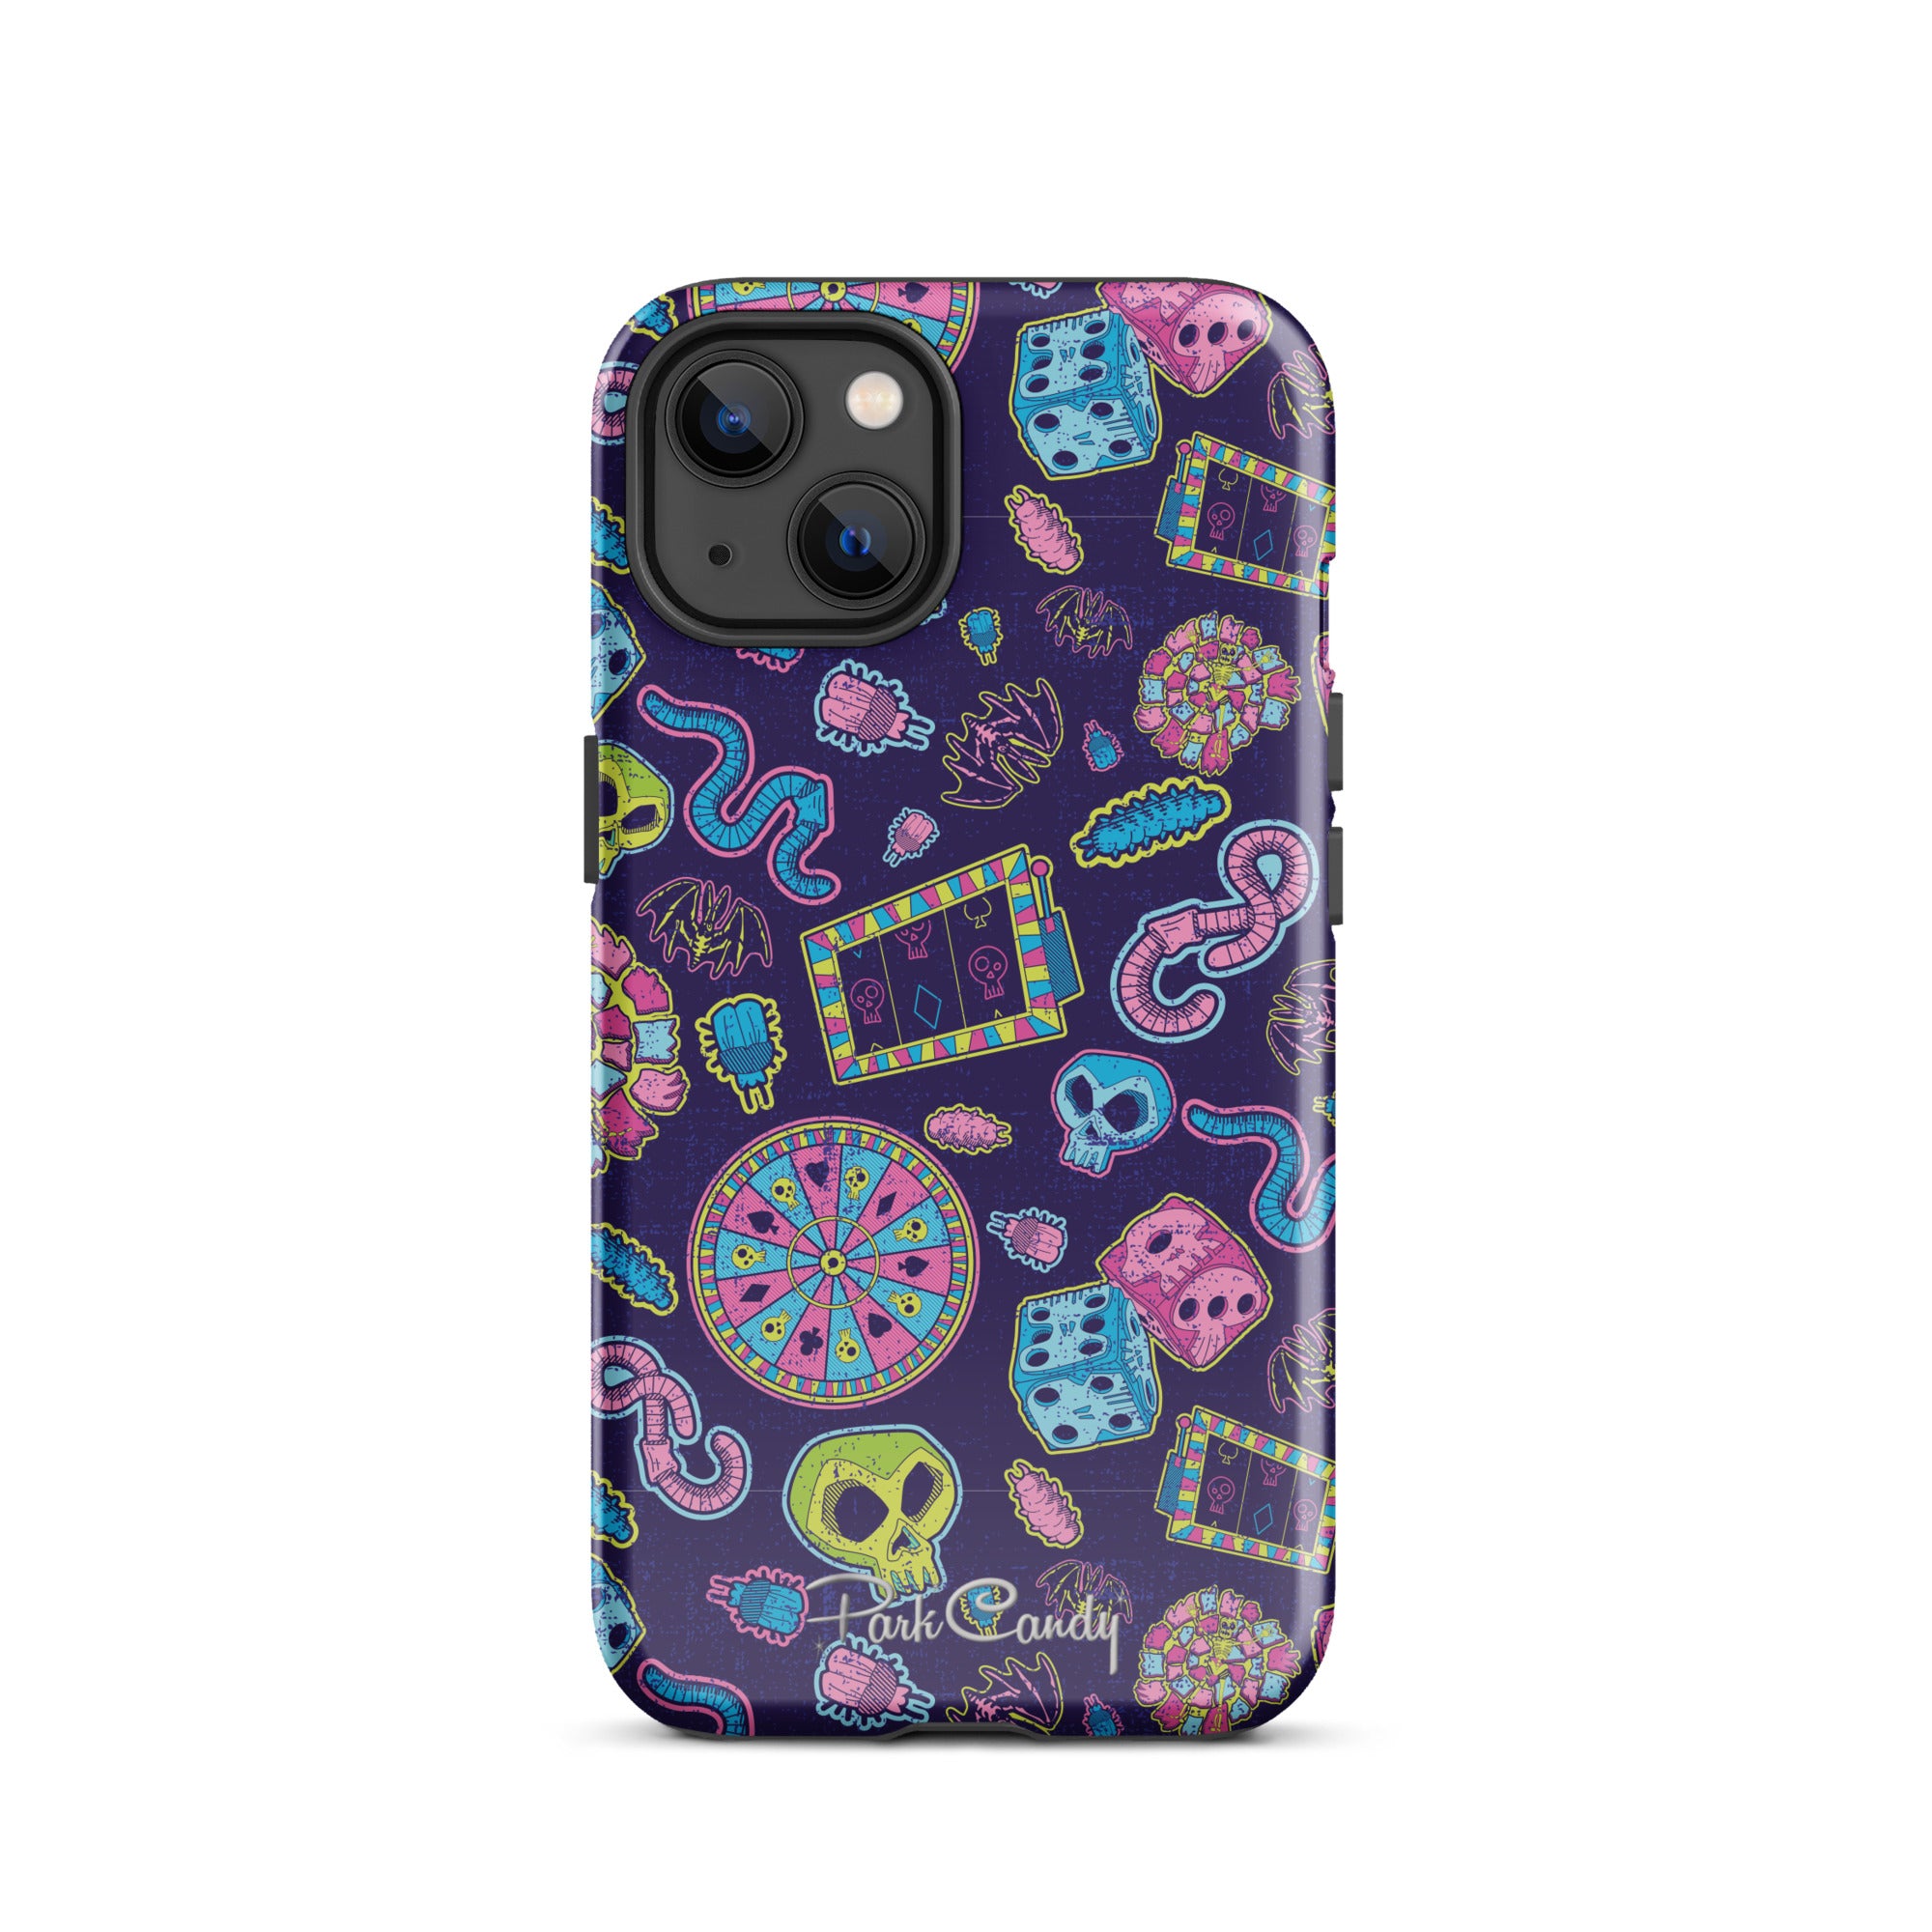 Boogie's Casino Tough Case for iPhone® - Park Candy